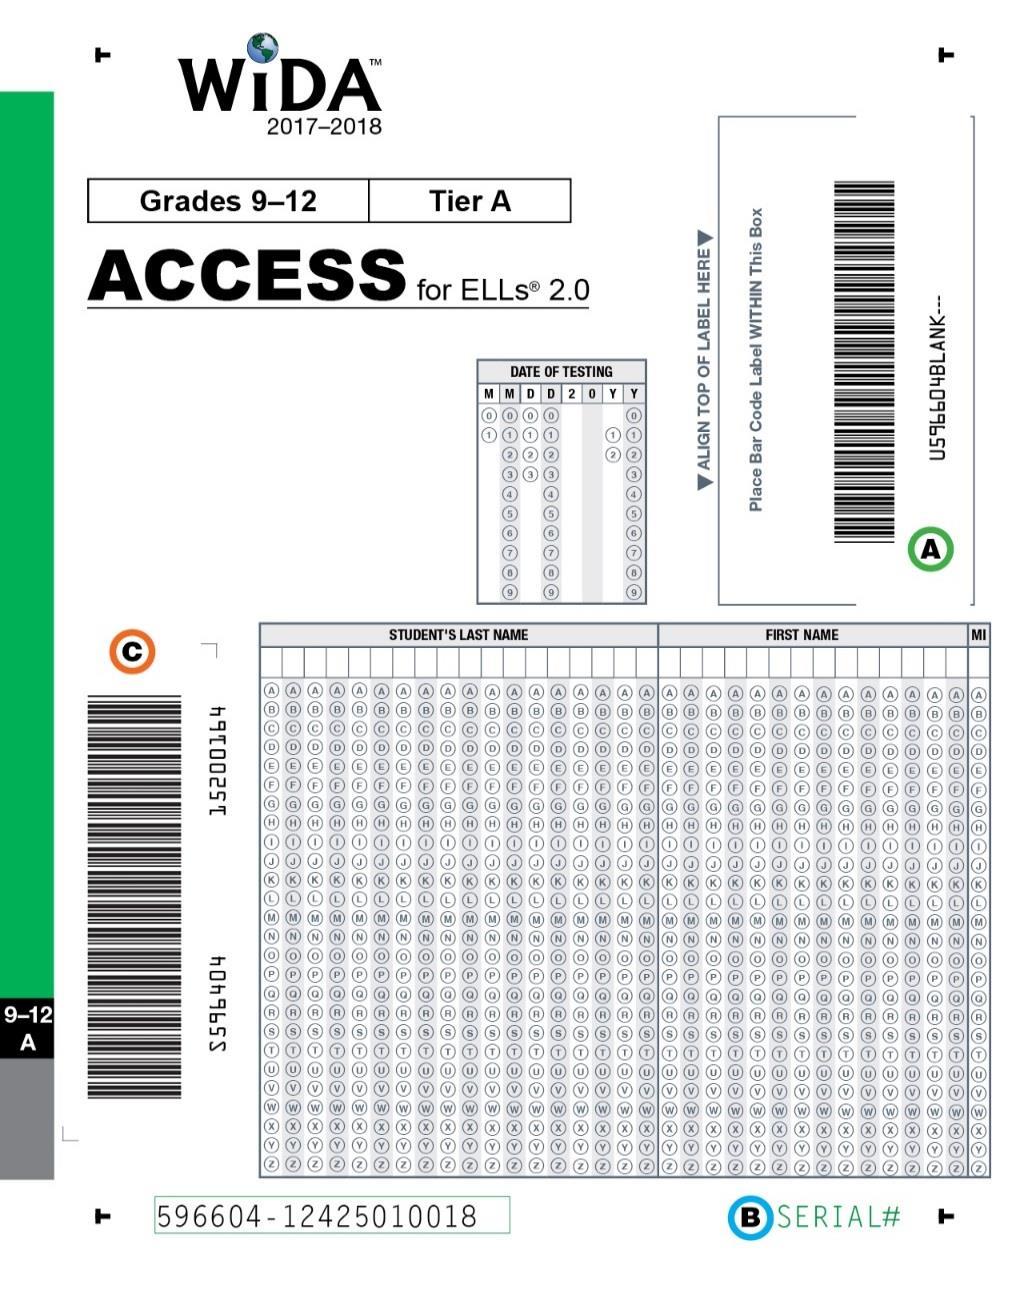 Label Placement ONLY PLACE LABEL HERE Figure 4: Sample Front Cover: Label Placement Please follow these steps: If using a Pre-ID Label, apply label to box marked and begin testing.